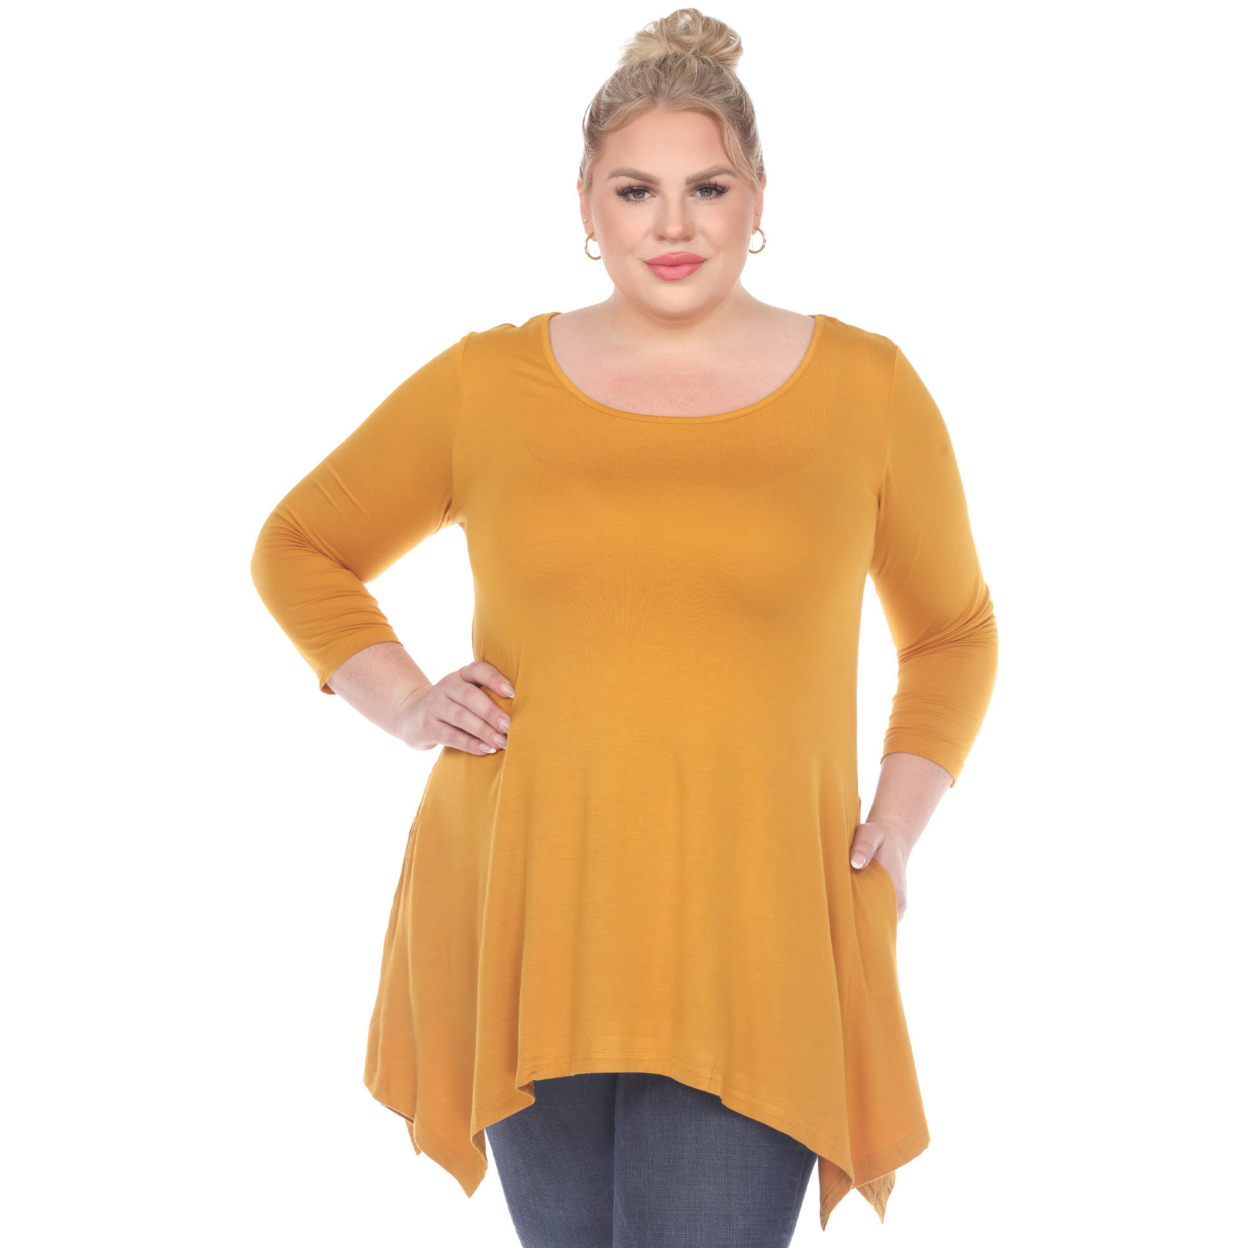 White Mark Women's Quarter Sleeve Tunic Top With Pockets - Mustard, 3X